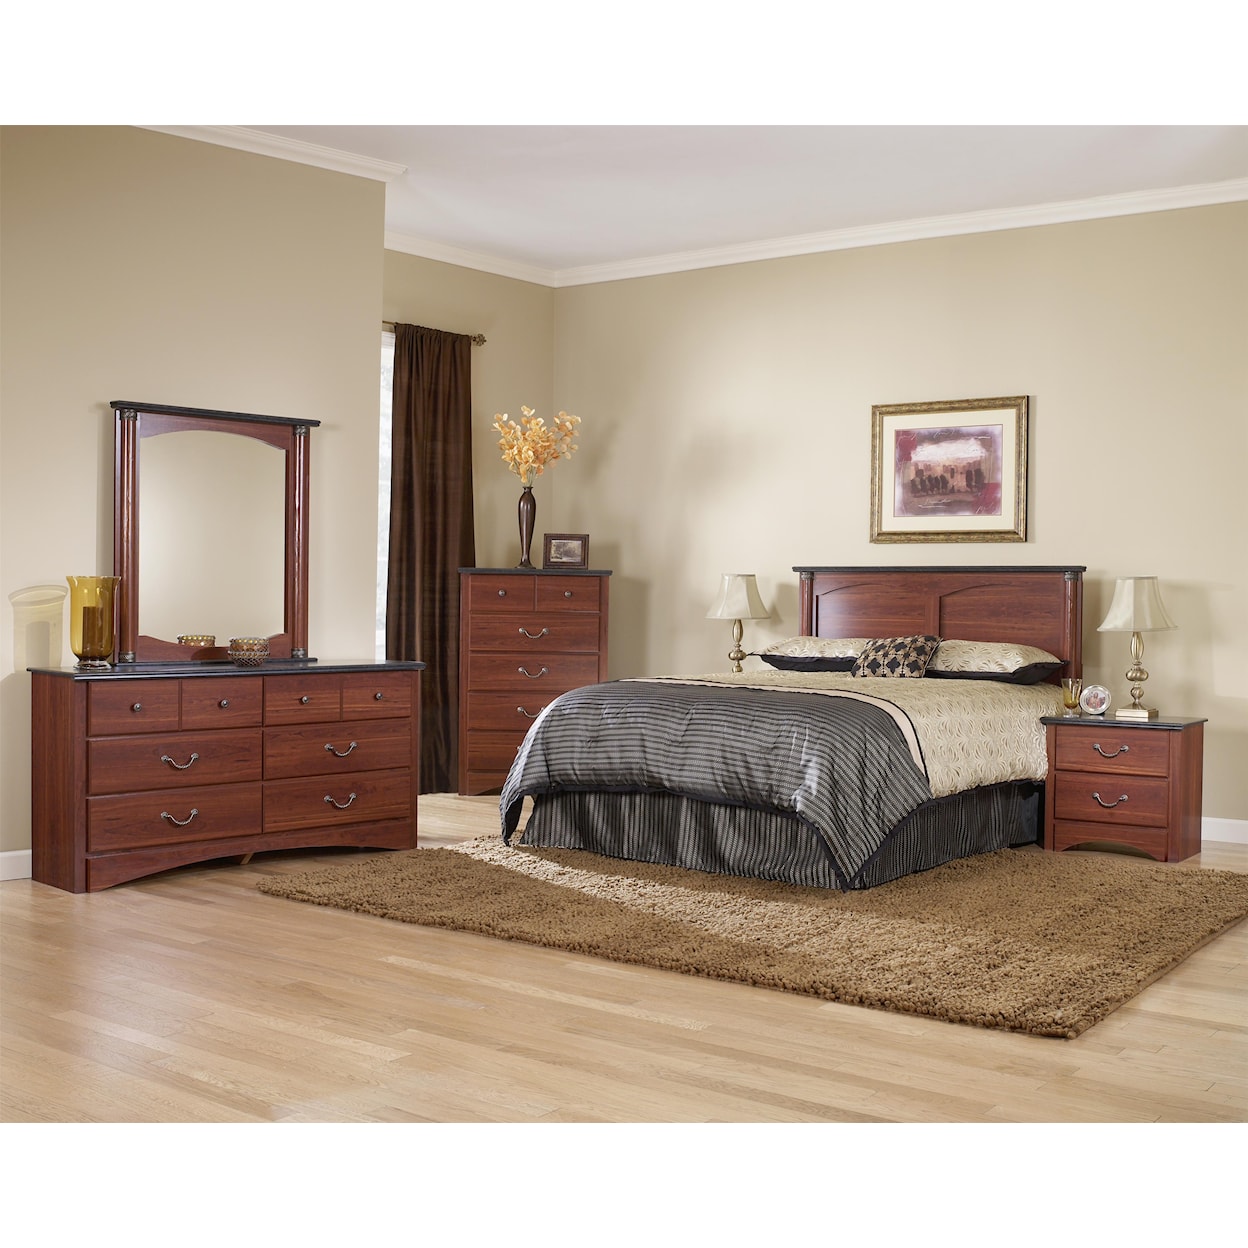 Perdue 30000 Series 5-Drawer Chest